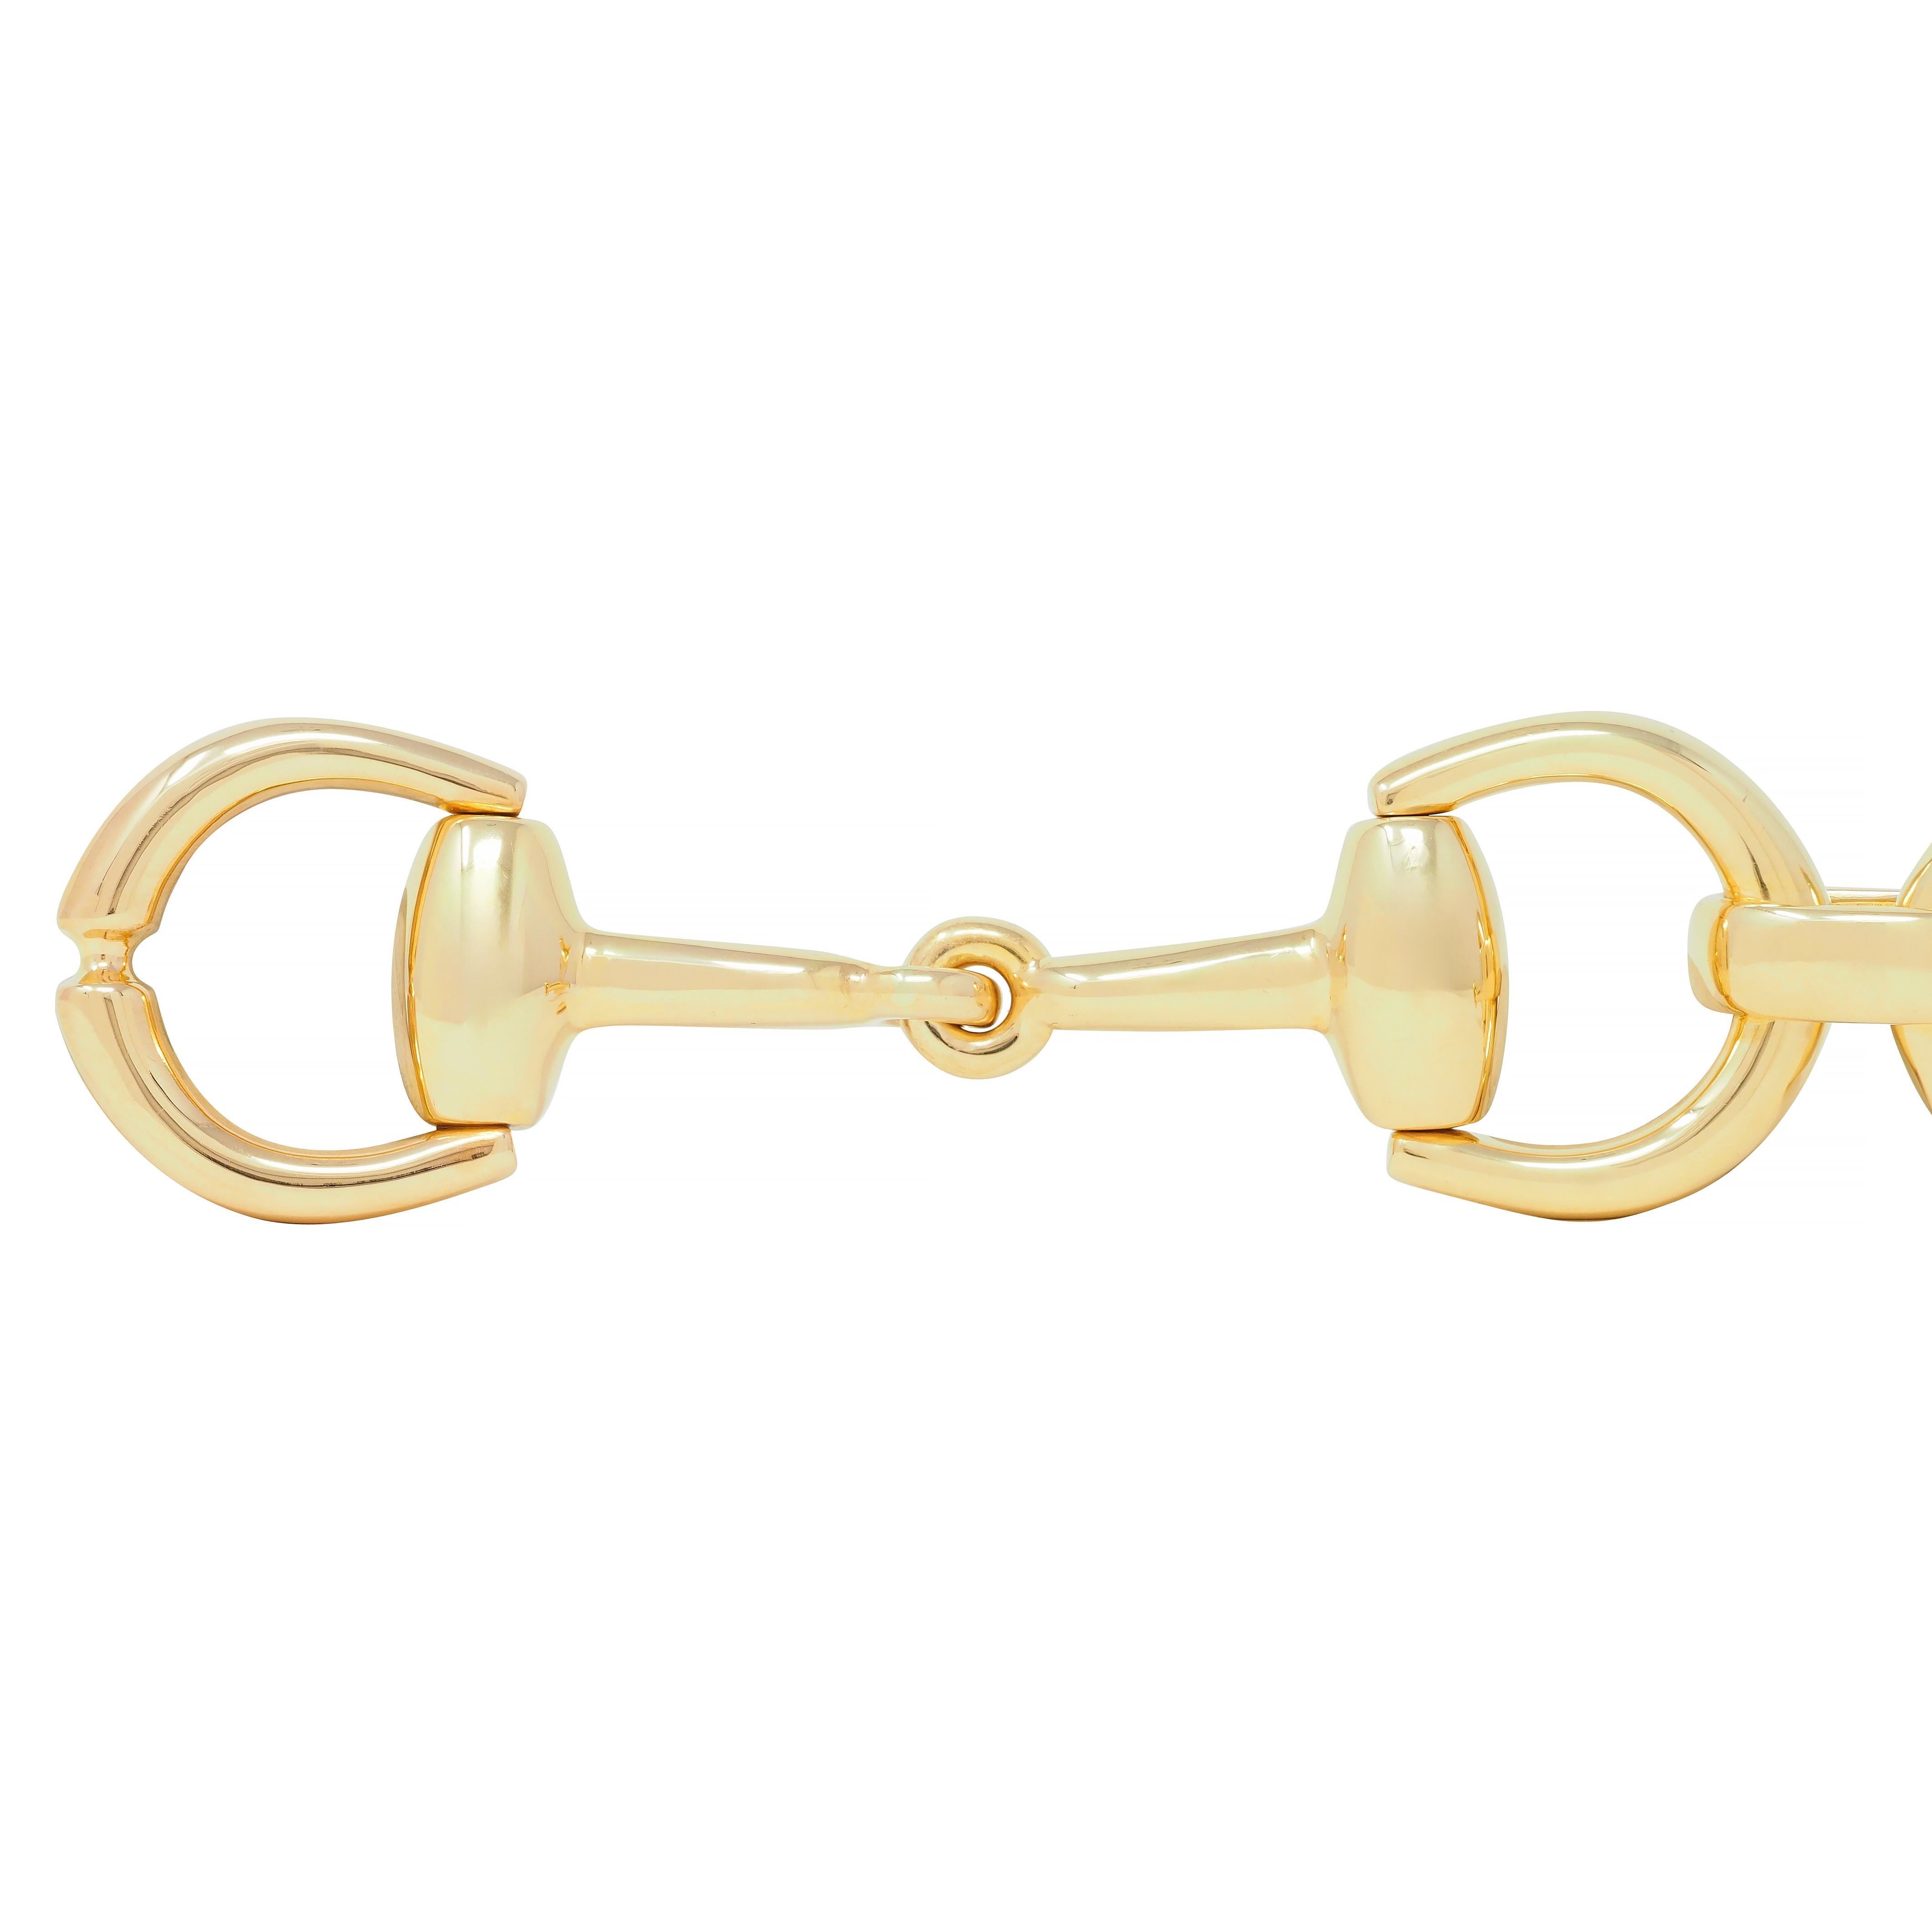 Bracelet is designed as large horsebit motif links
Connected via large oval shaped links
With high polished gold finish
Terminating horsebit is hinged as clasp closure
Stamped 750 with Italian assay marks for 18 karat gold
Fully signed Gucci, Made